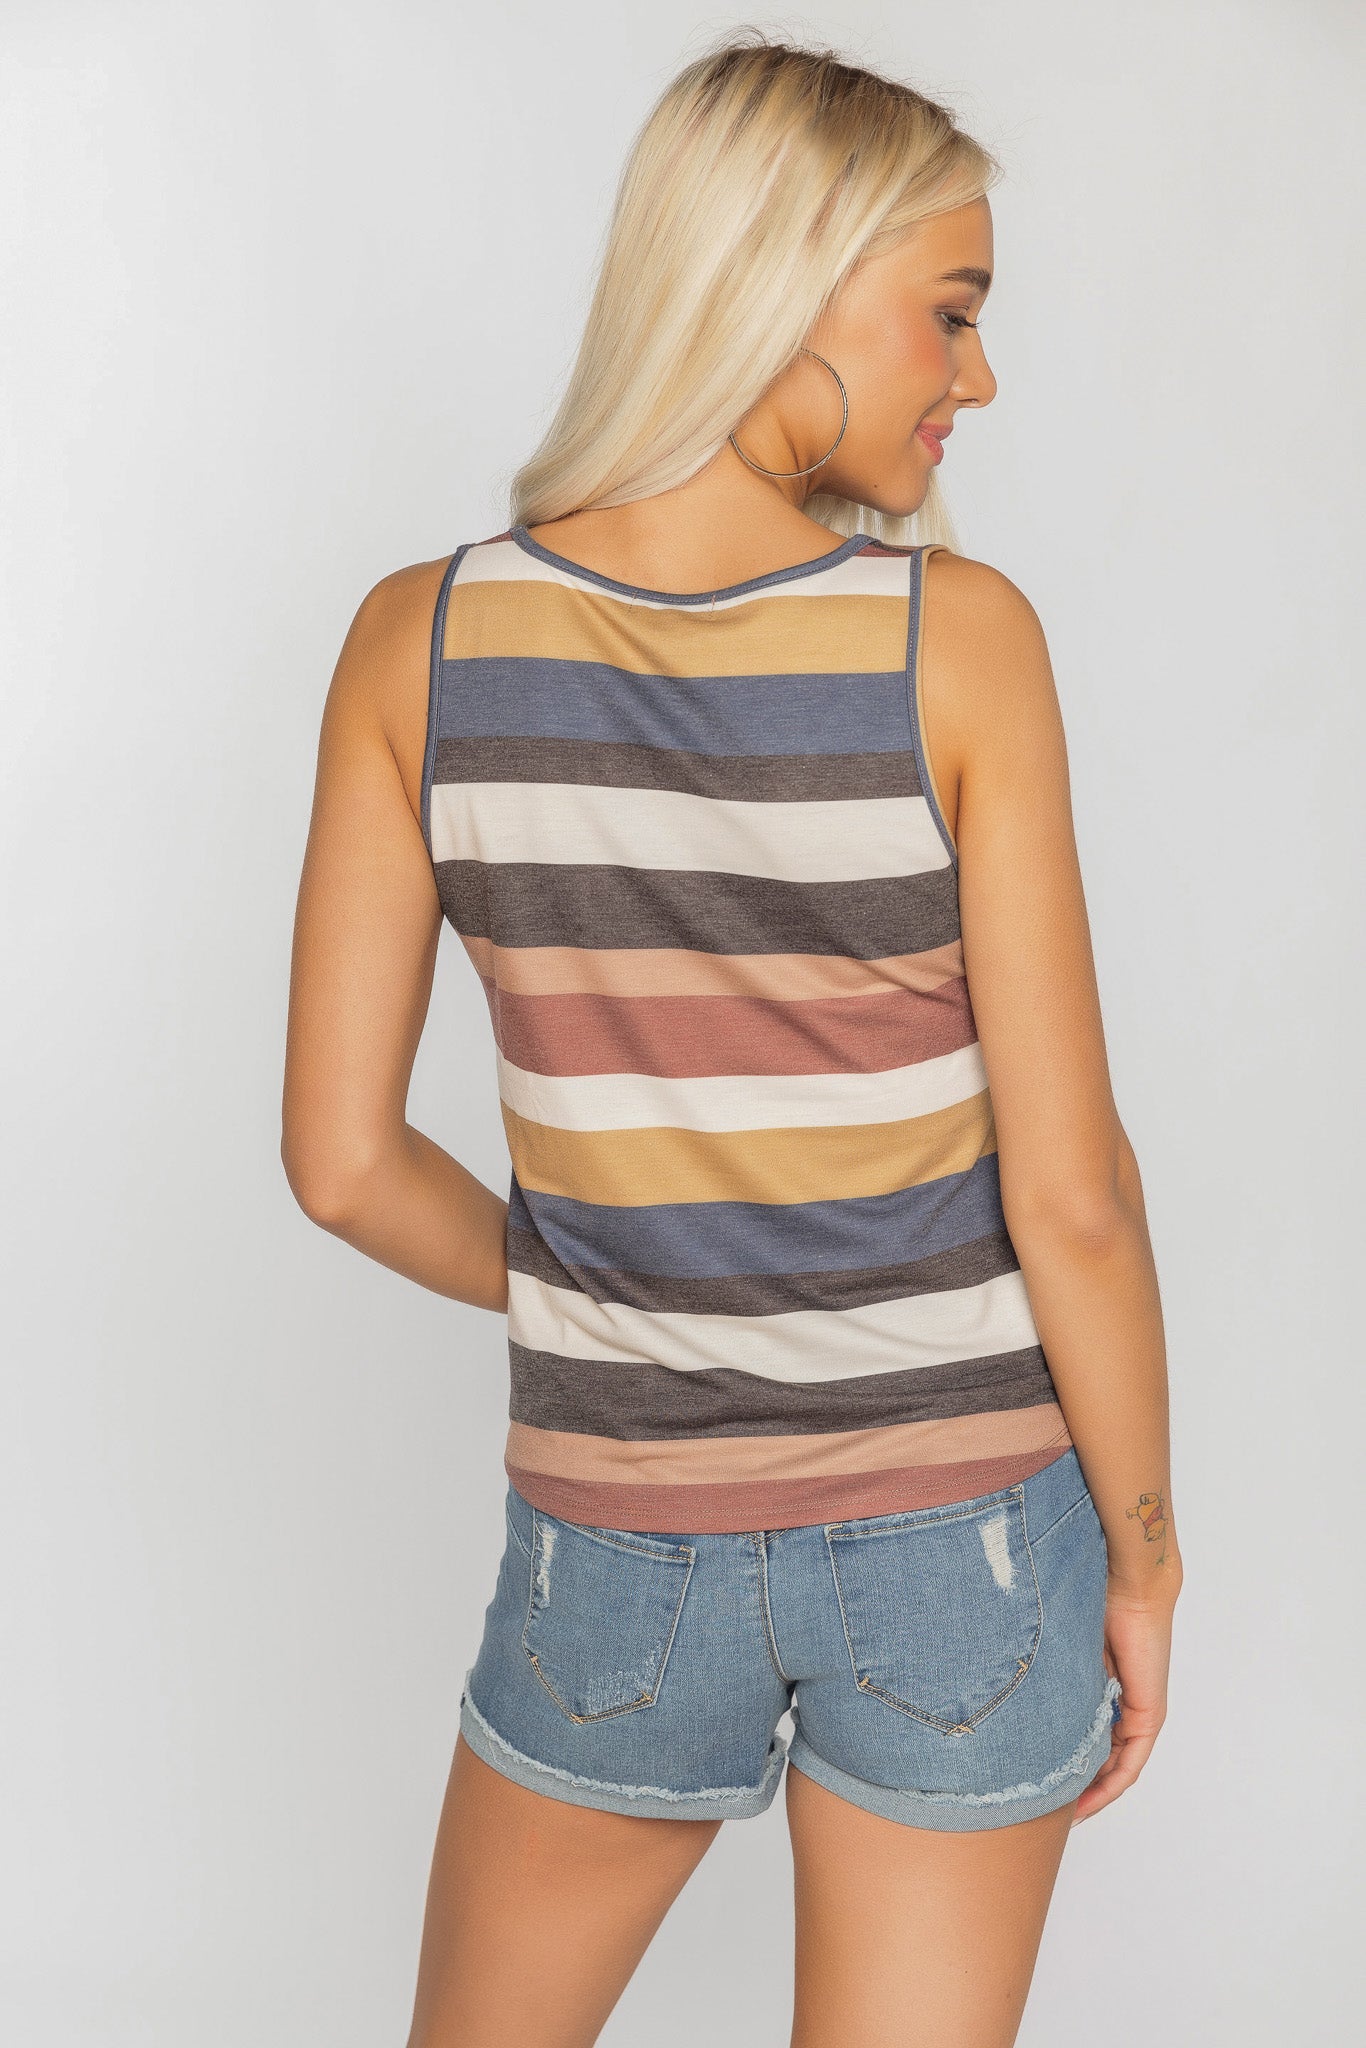 Stripe Sleeveless Top with Tie-Front